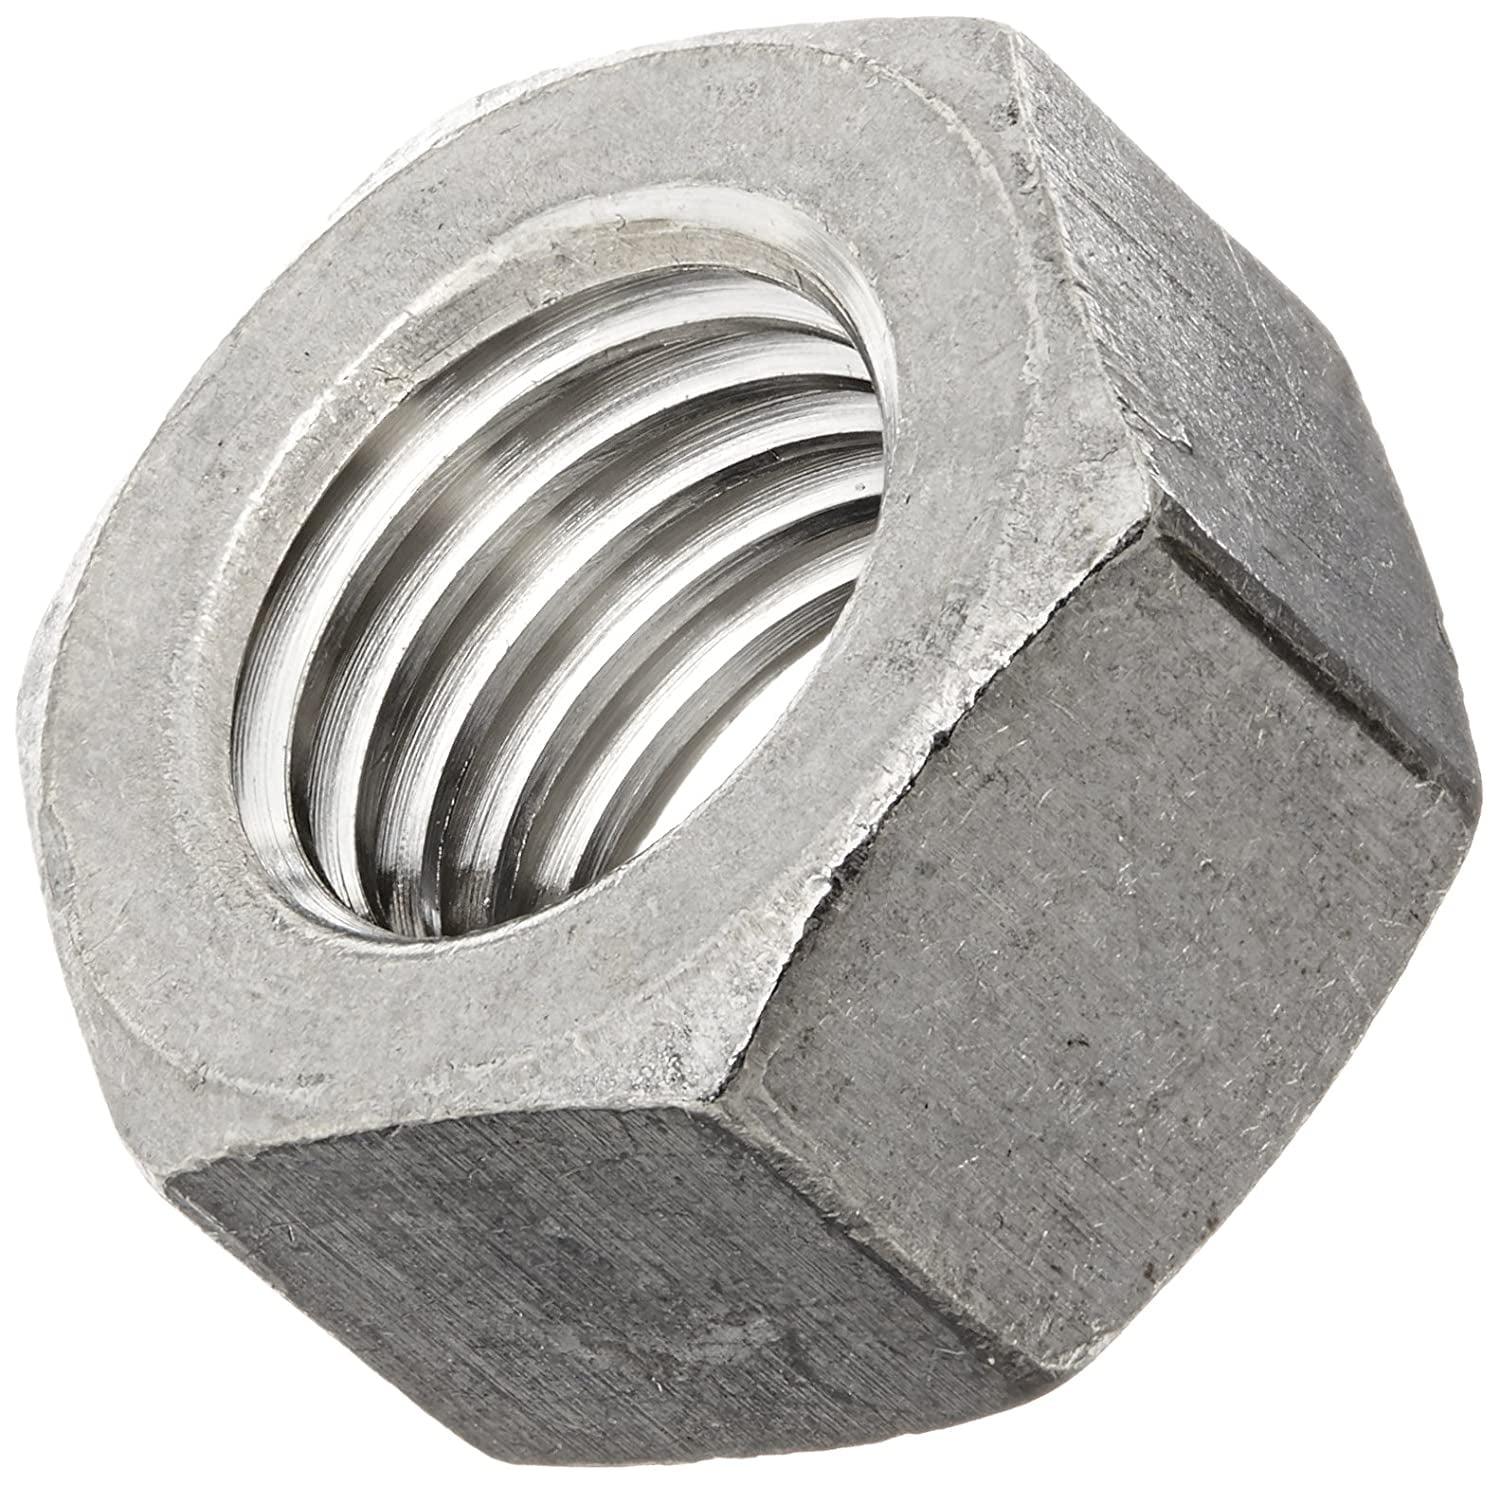 Stainless Steel Hex Nut 1/2" 13 Qty 150 pcs 